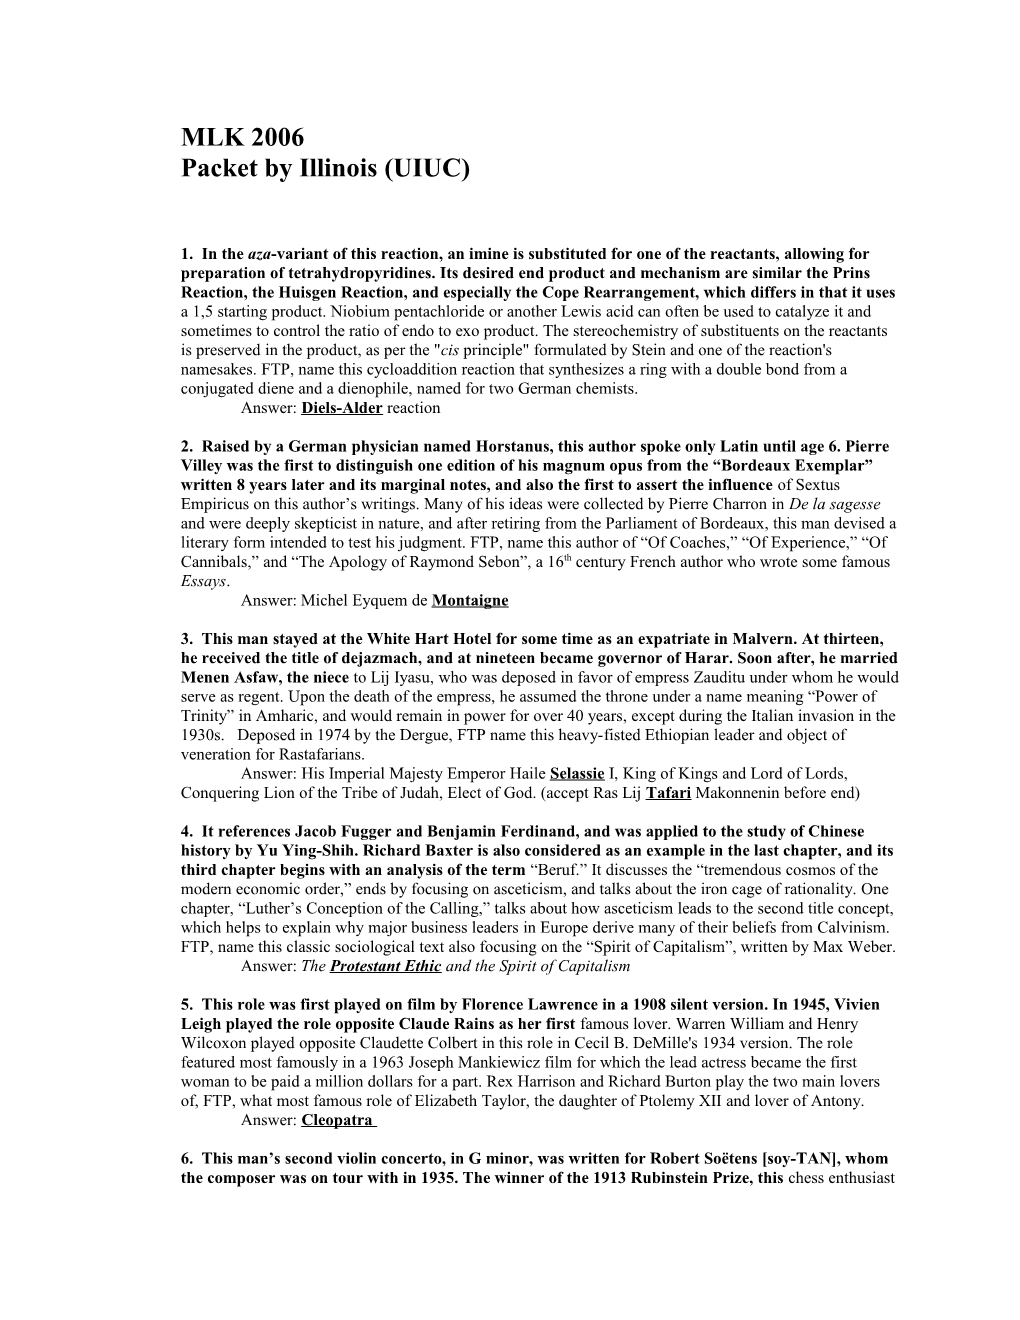 Packet by Illinois (UIUC)